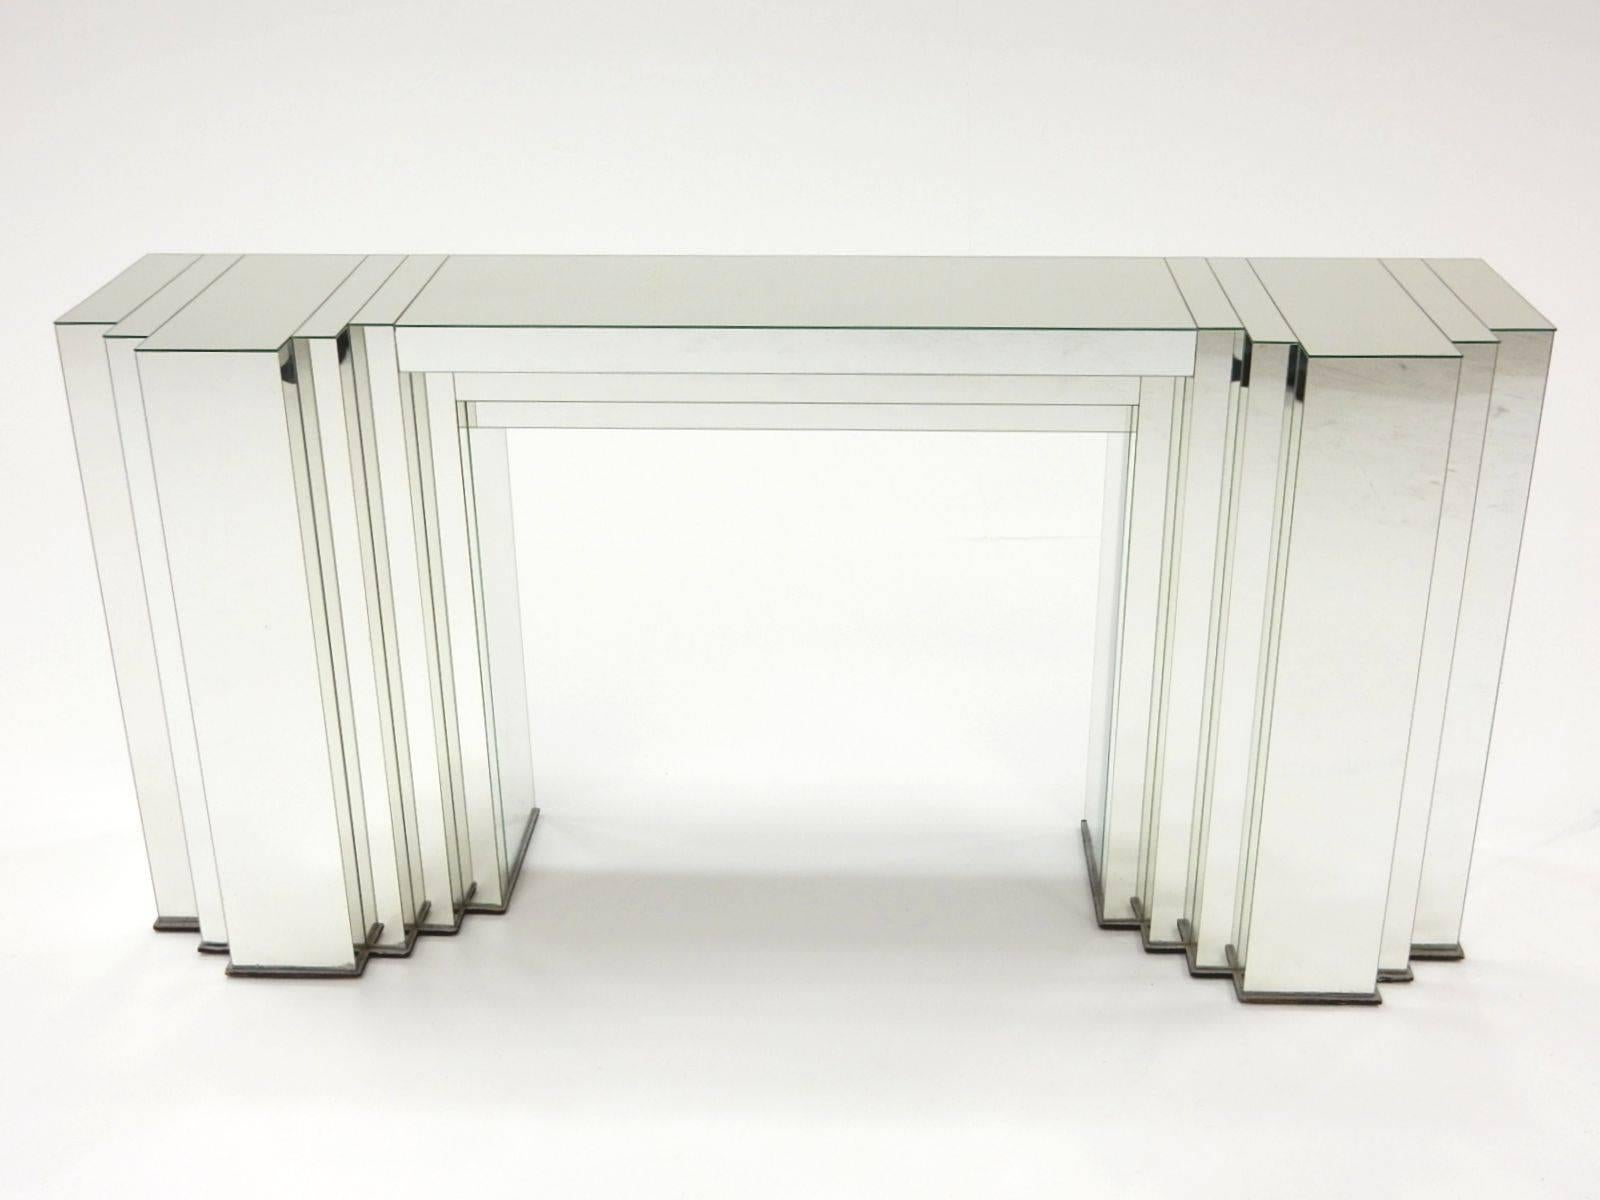 Multifaceted mirror console table in the manner of Paul Frankl. Not signed or marked. 
Large and exceptionally well crafted piece of functional art furniture.
